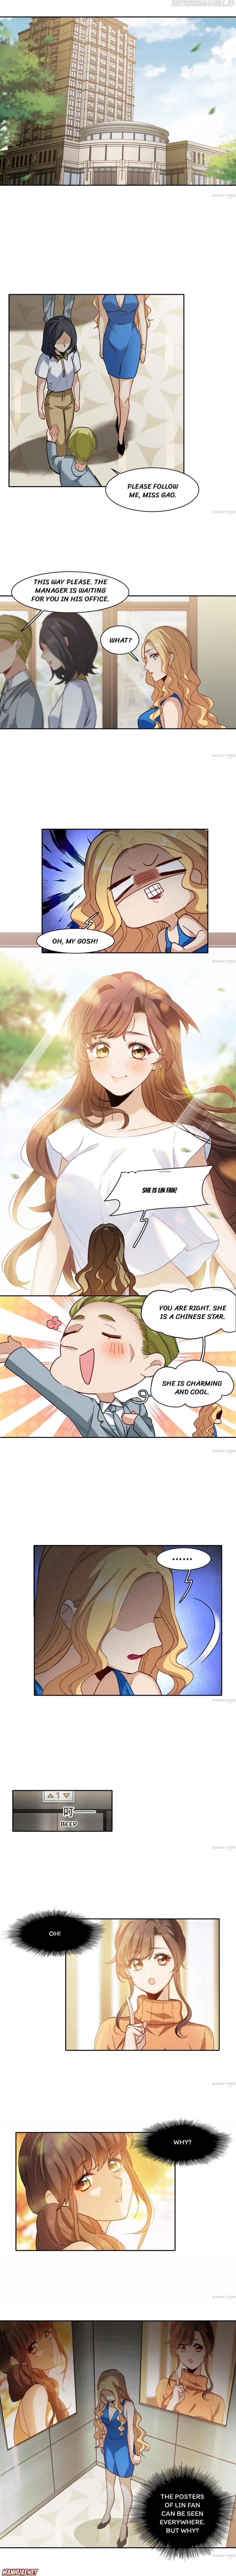 The Brightest Giant Star In The World - Page 2